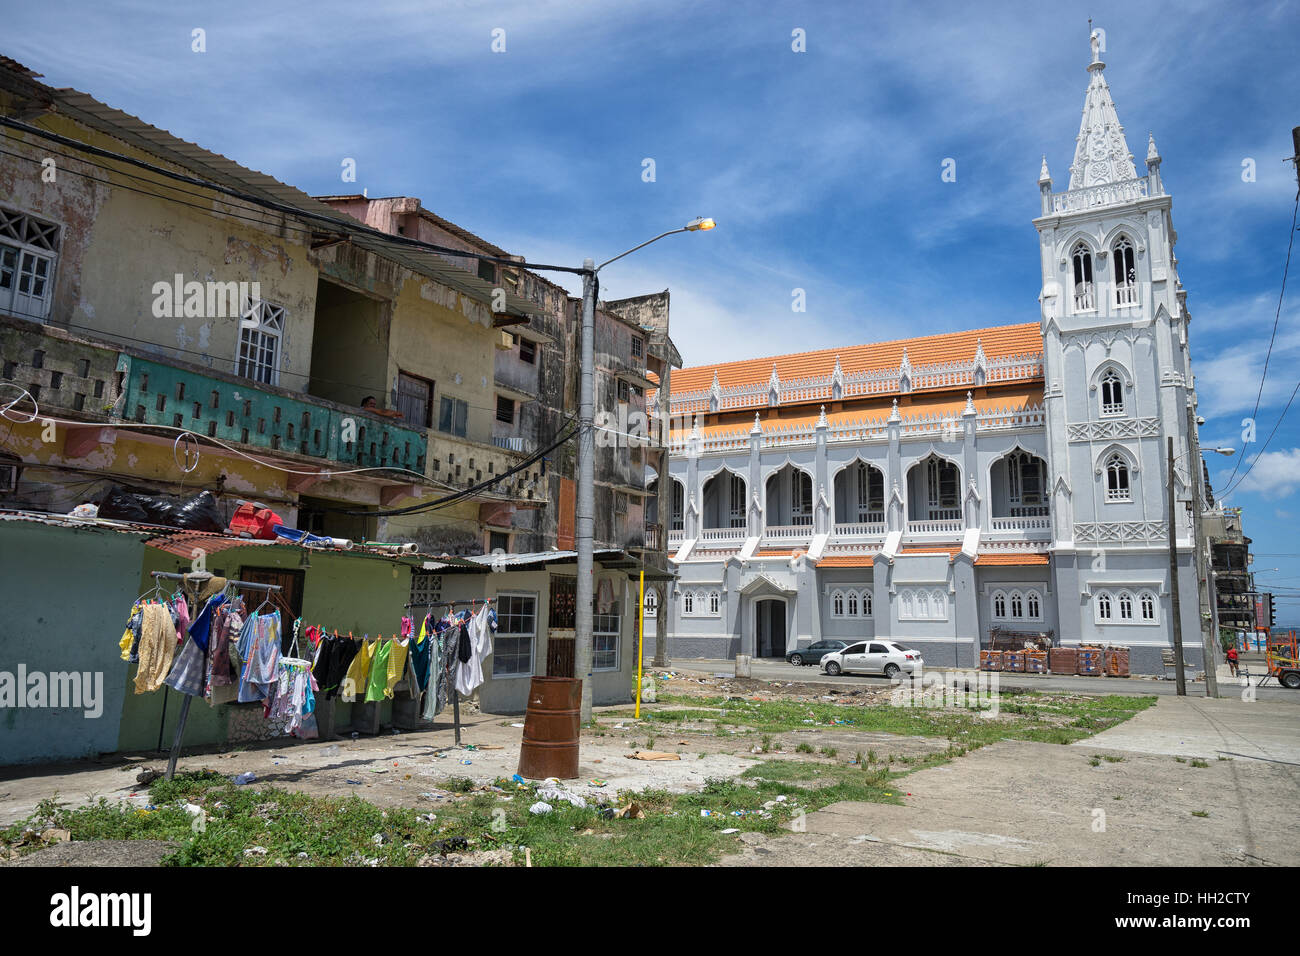 June 9, 2016 Colon, Panama: a renovated church stands out in the slums of the port town Stock Photo